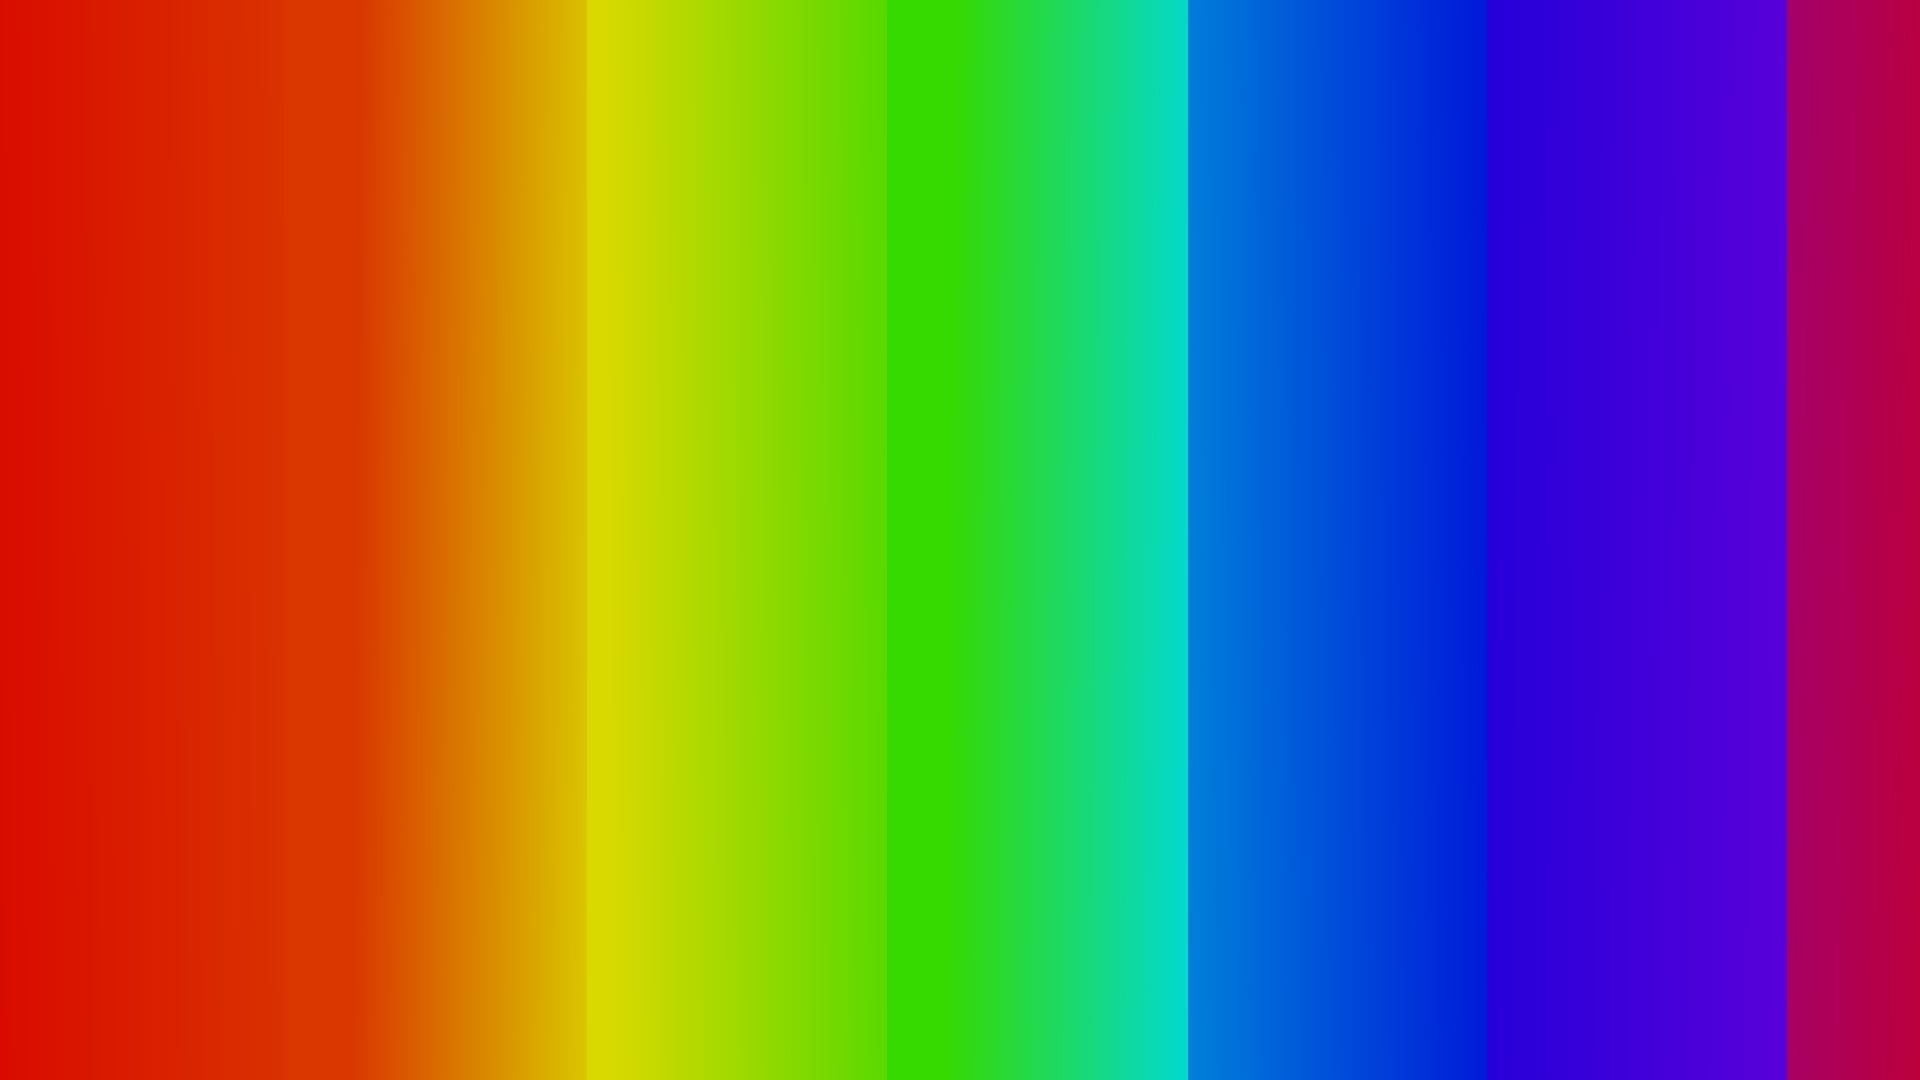 rainbows, solid color, multi colored, abstract, backgrounds